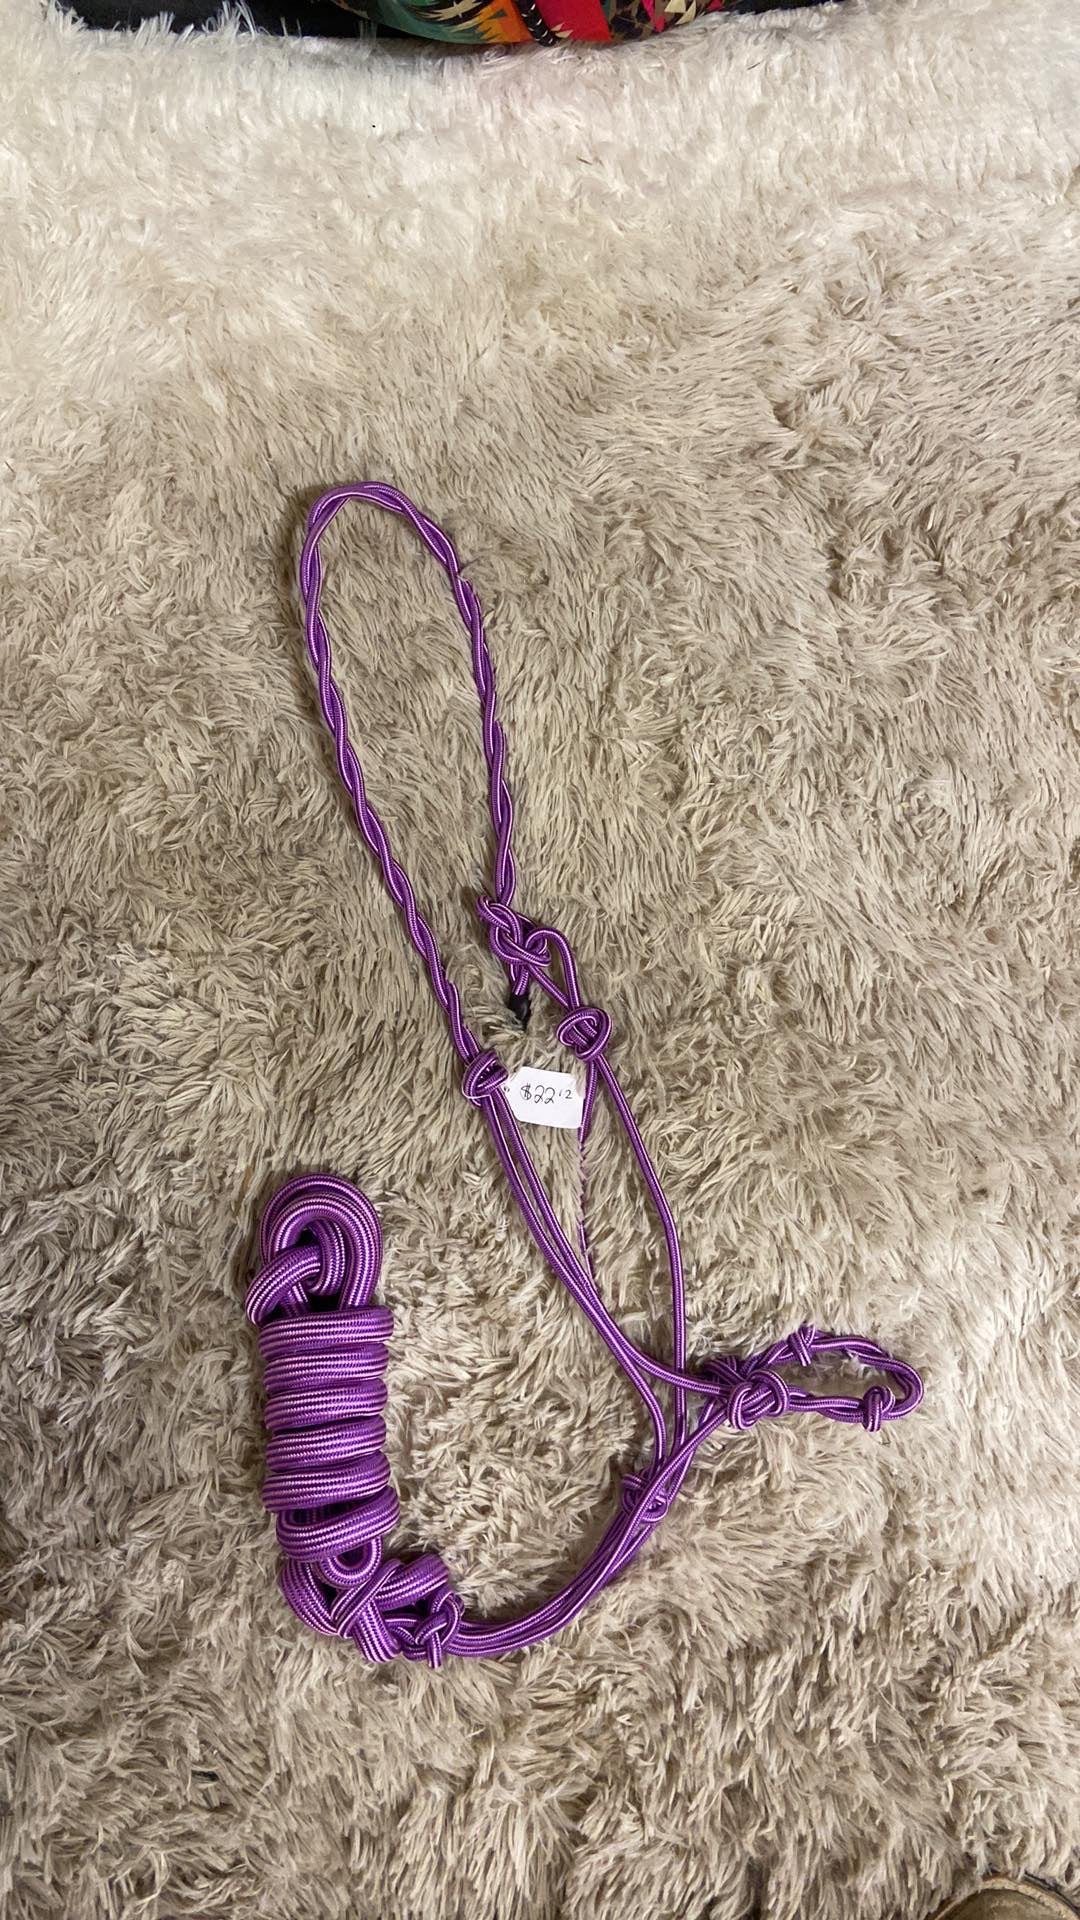 Purple rope halter and lead full size new